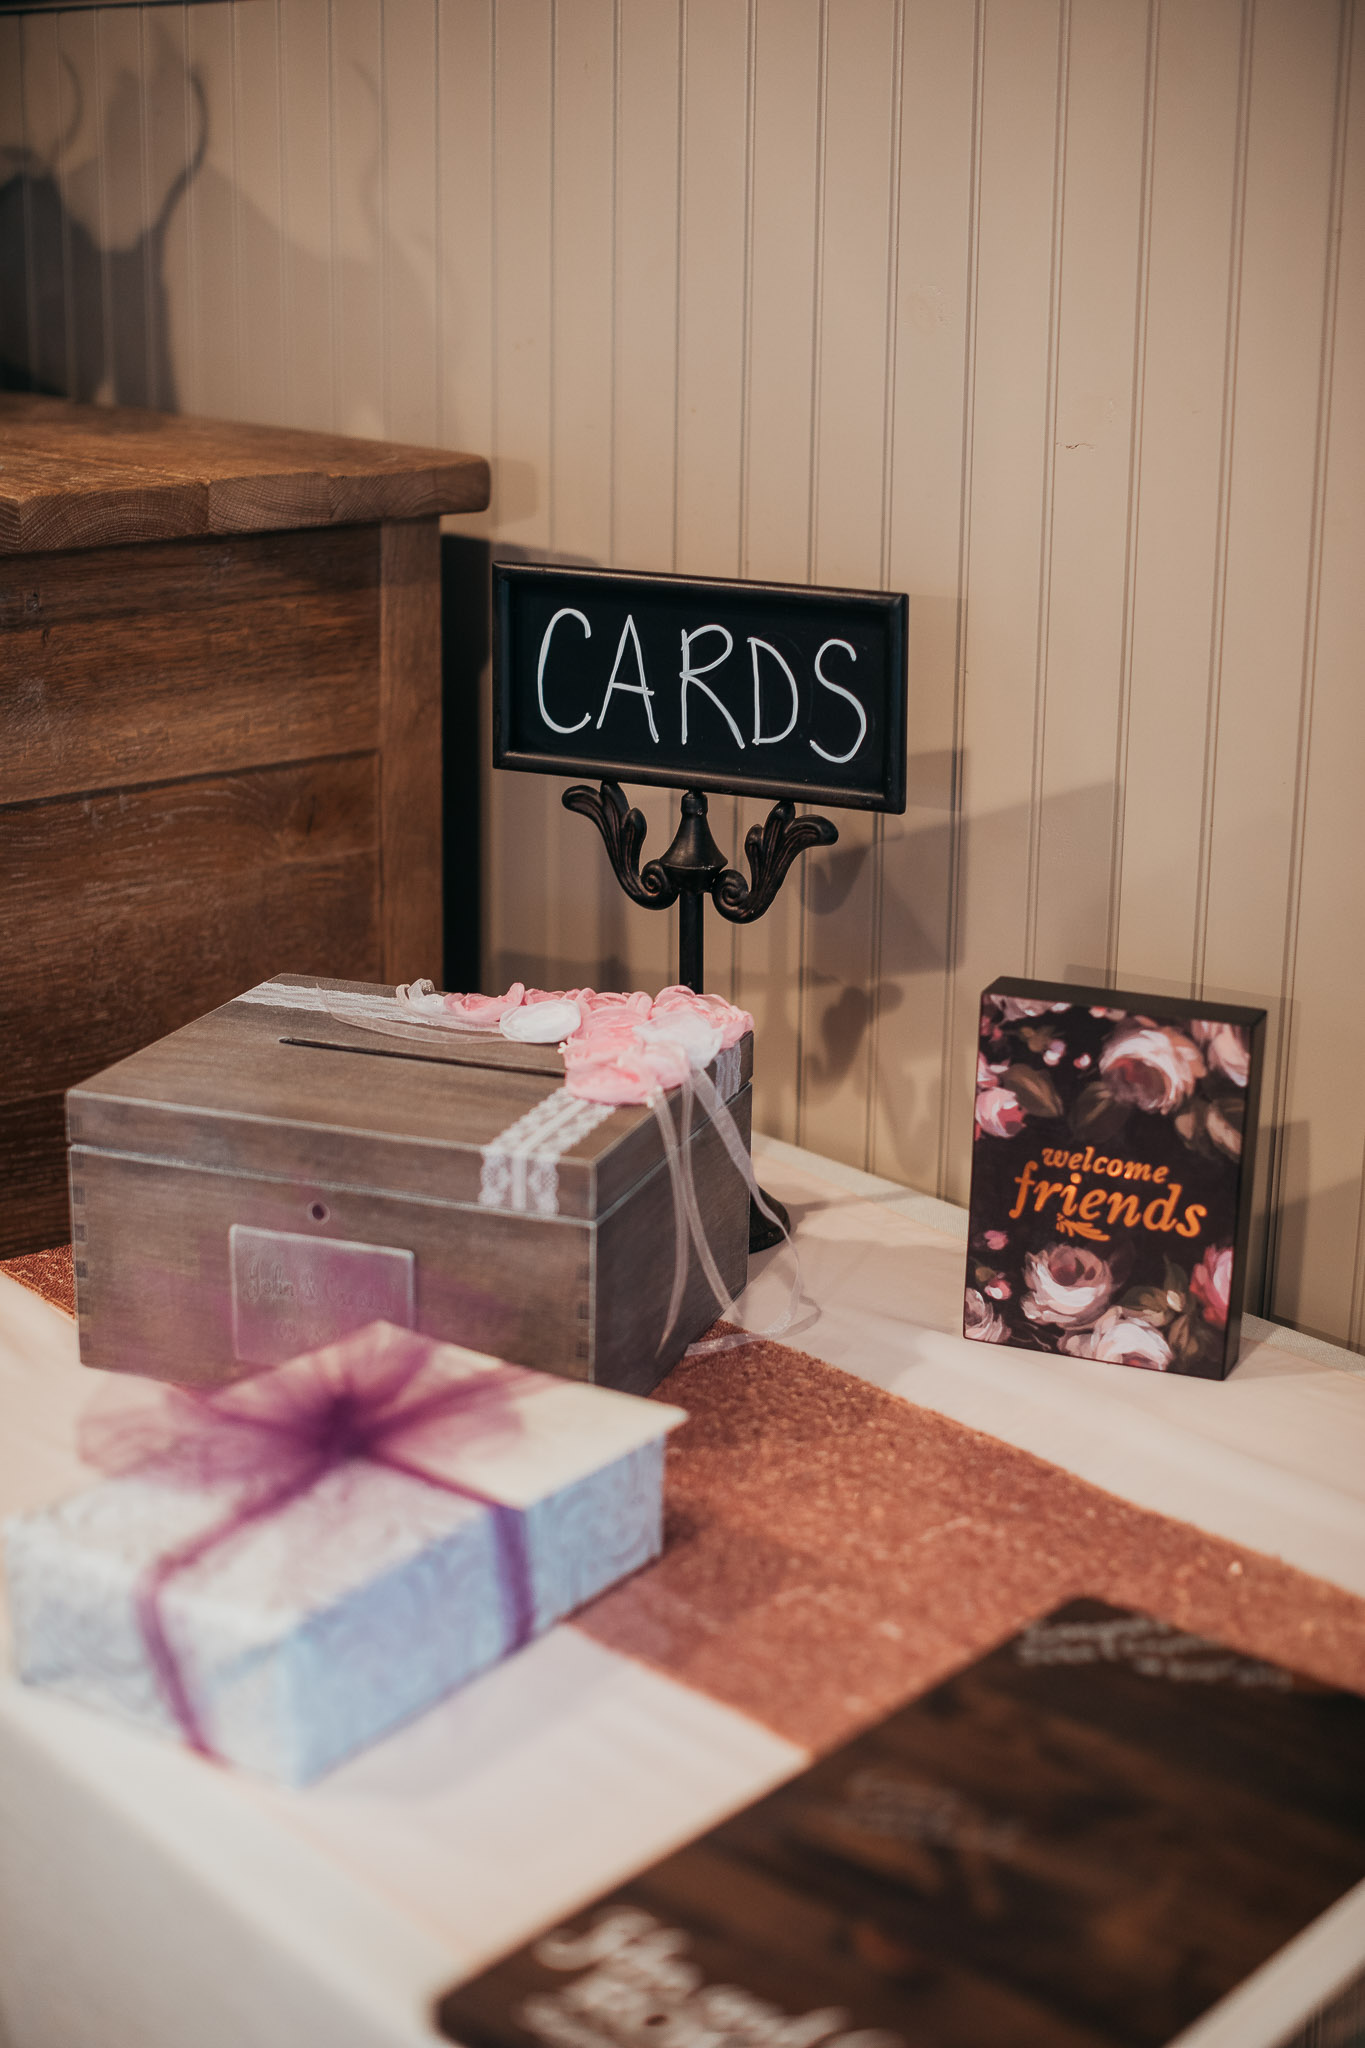 A table with cards and presents on it